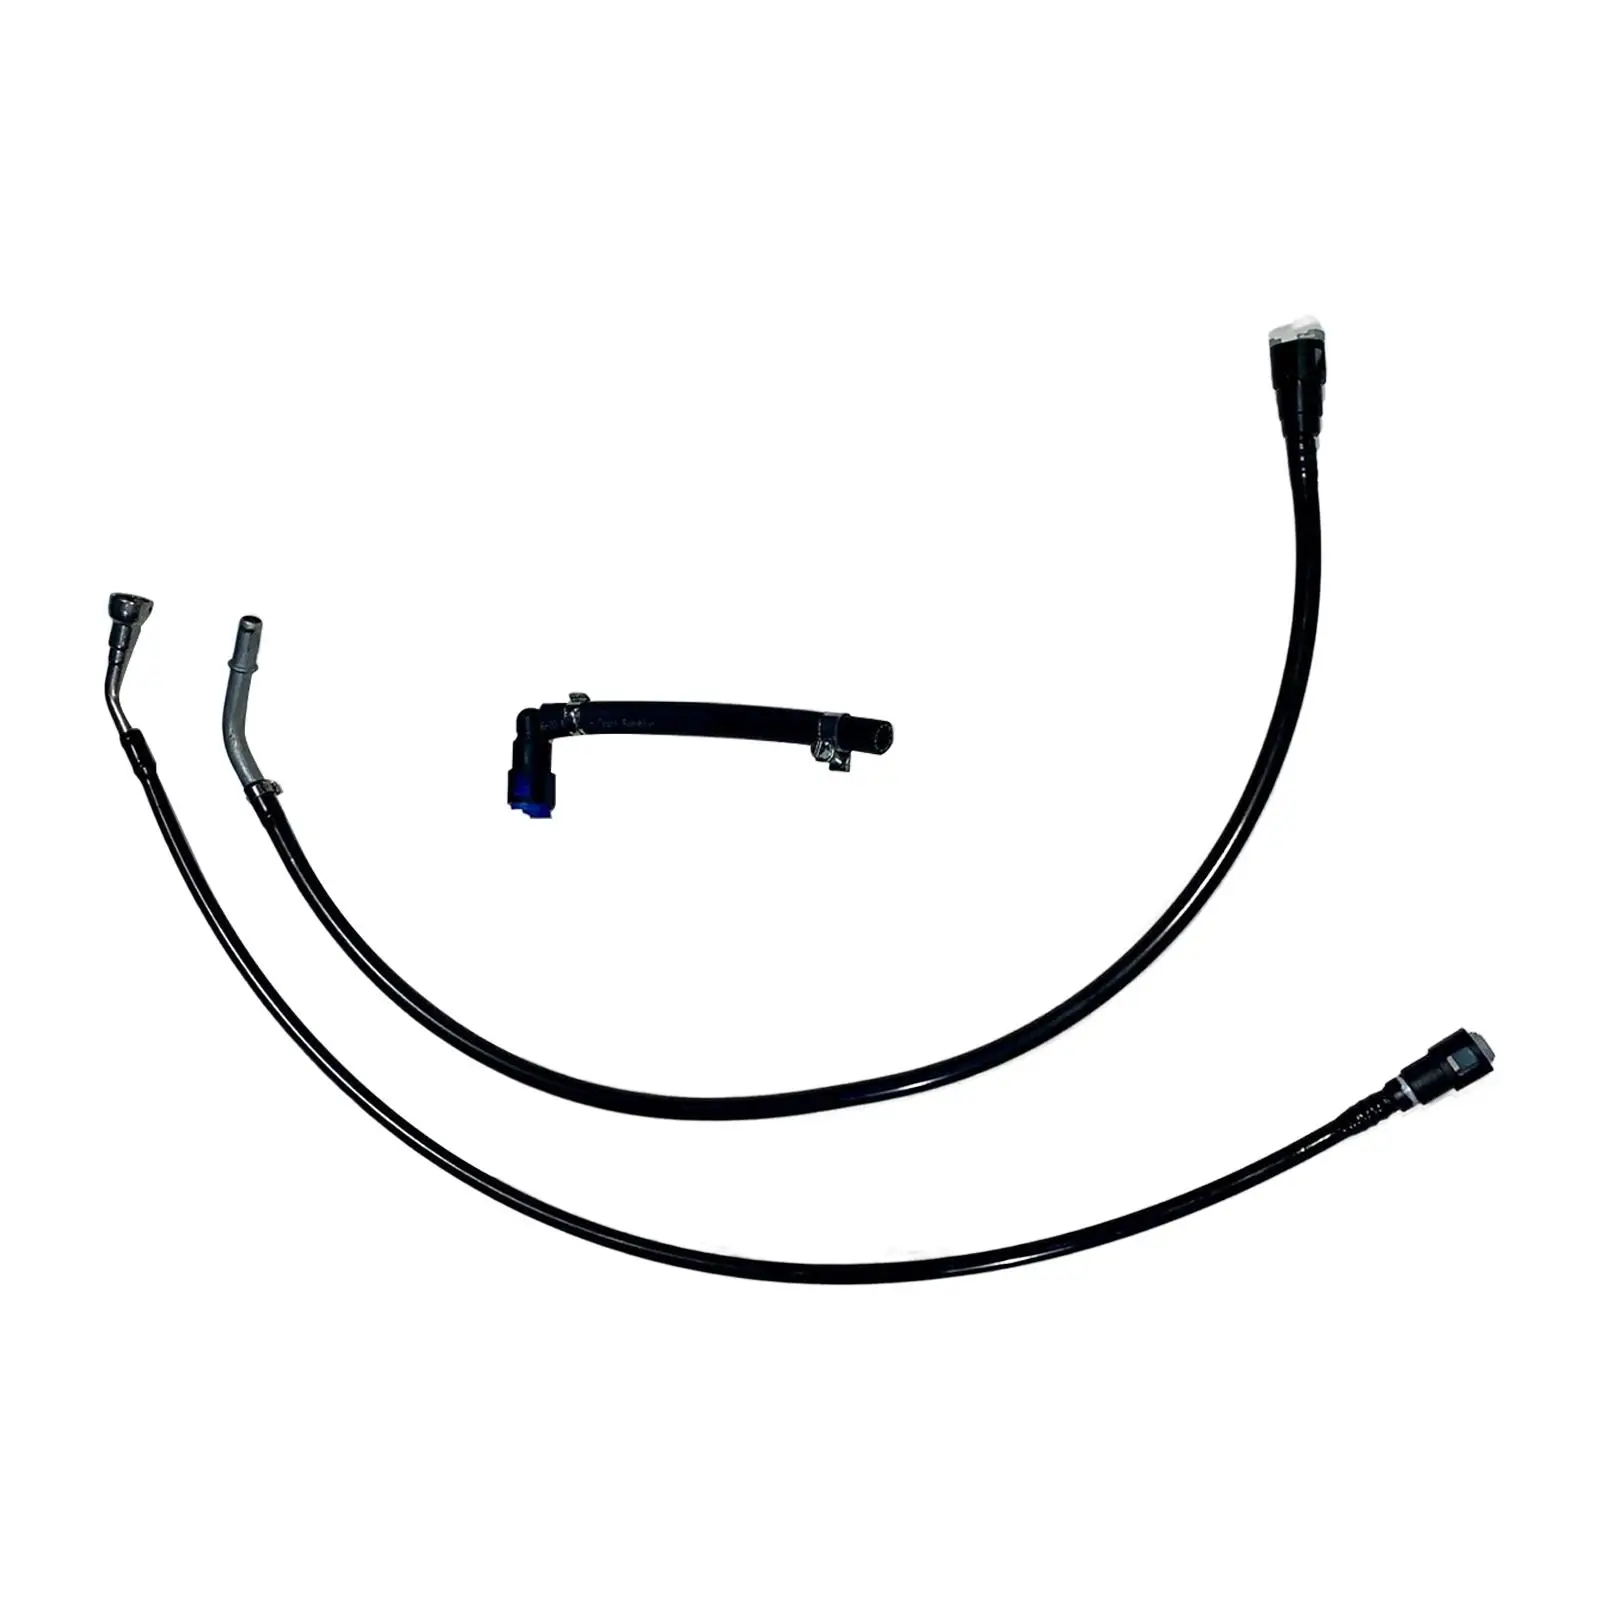 Fuel Lines Assembly Repair Parts fl Fg0918 for Jeep Grand Cherokee